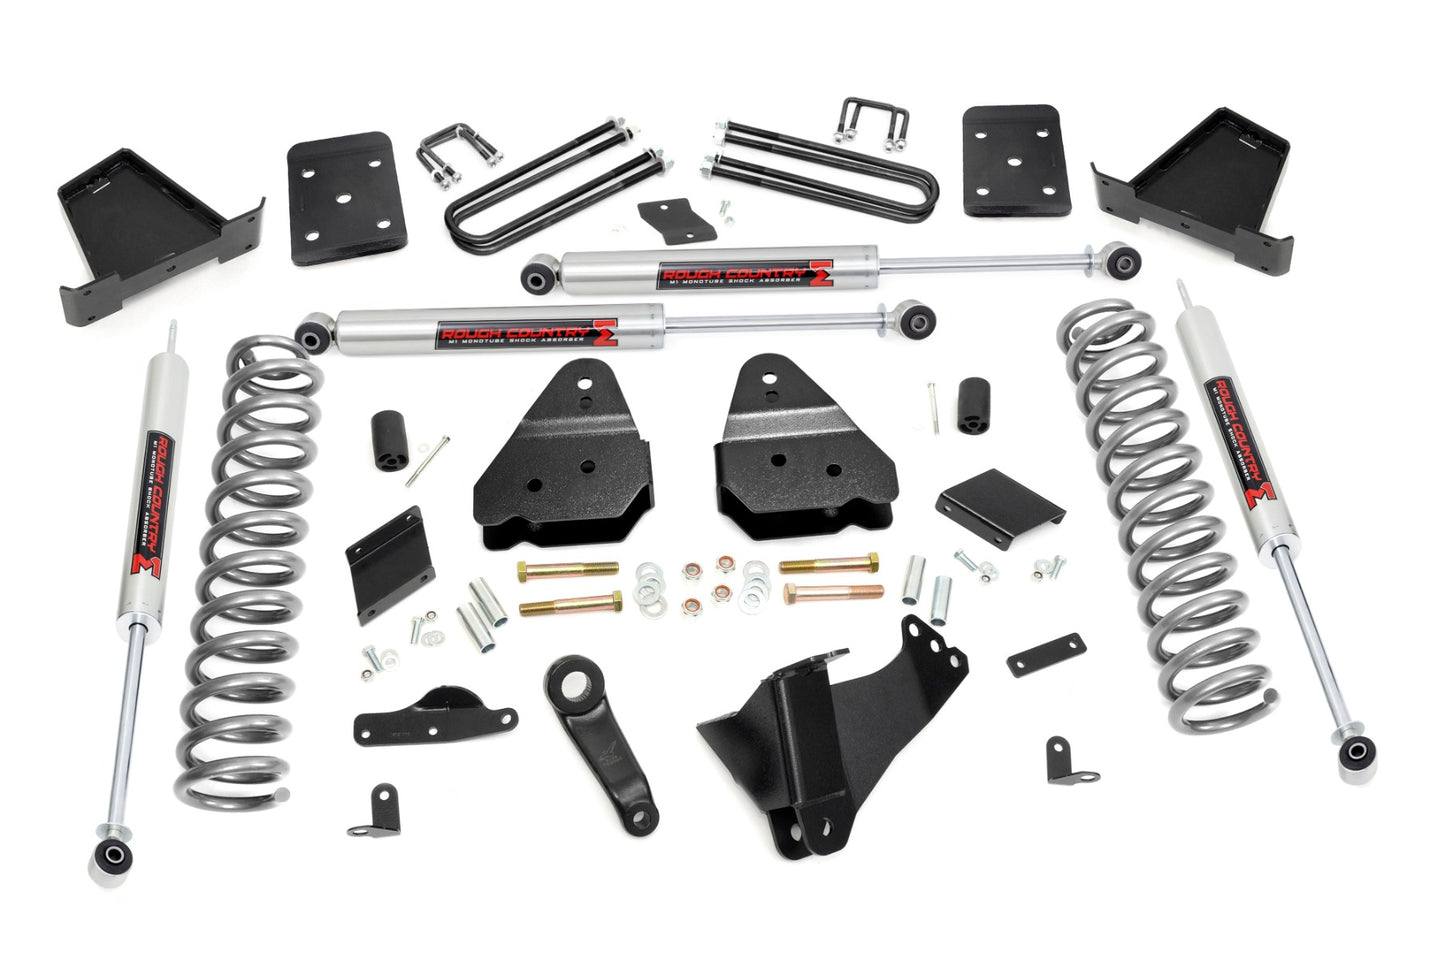 Rough Country (54840) 6 Inch Lift Kit | Diesel | OVLD | M1 | Ford F-250 Super Duty 4WD (2015-2016)